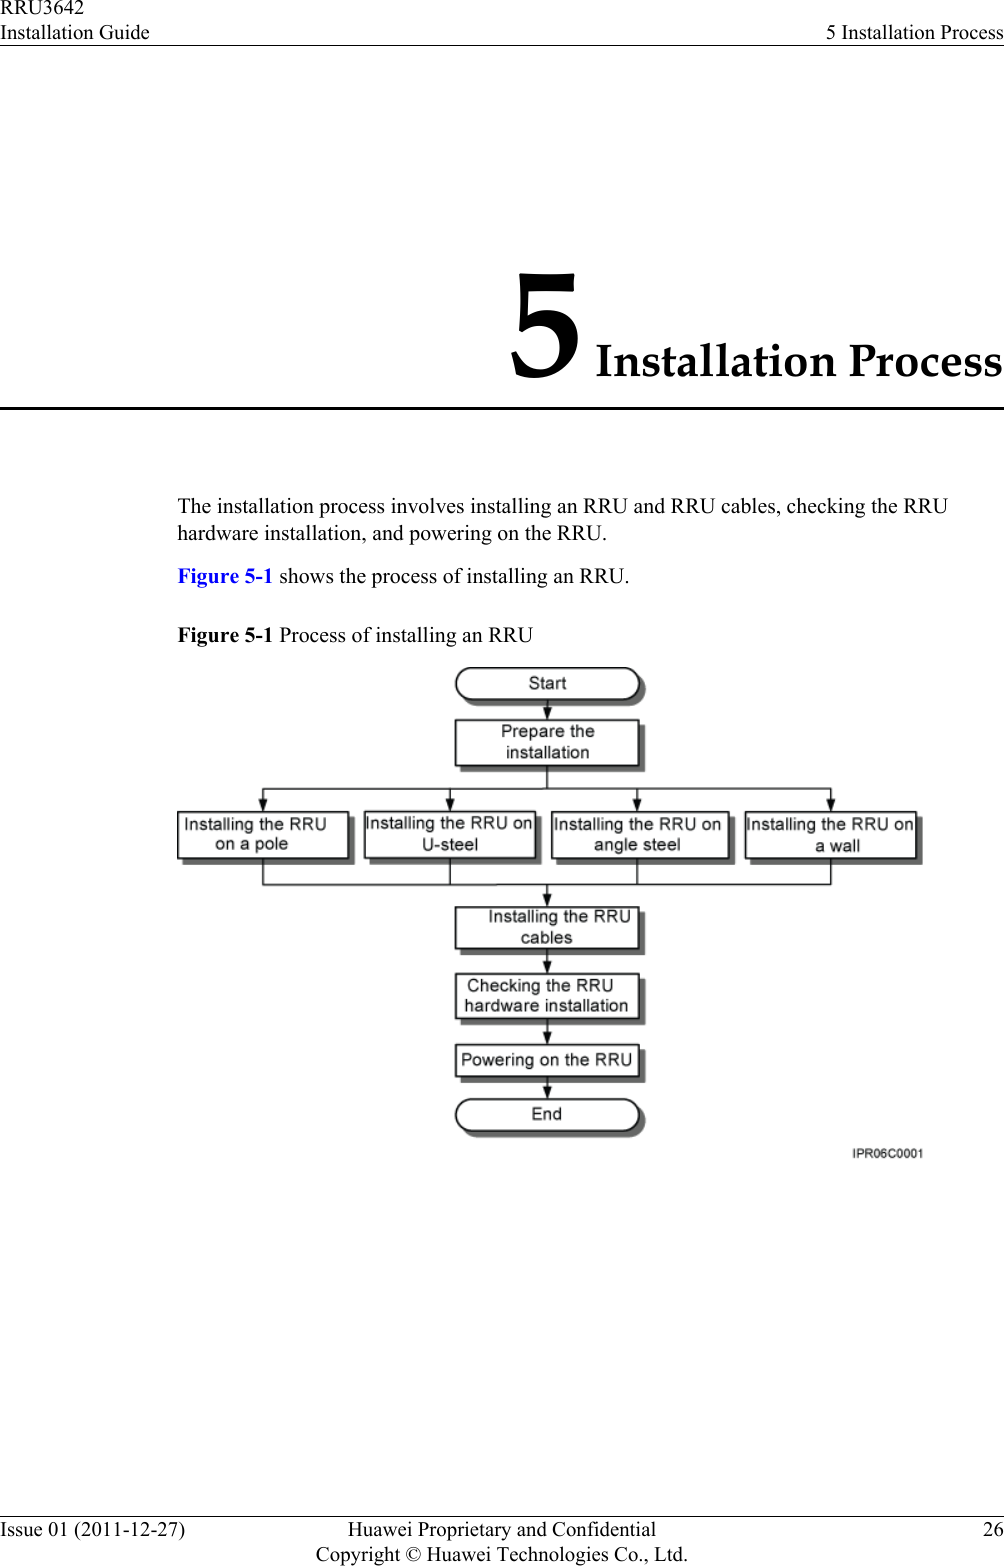 5 Installation ProcessThe installation process involves installing an RRU and RRU cables, checking the RRUhardware installation, and powering on the RRU.Figure 5-1 shows the process of installing an RRU.Figure 5-1 Process of installing an RRURRU3642Installation Guide 5 Installation ProcessIssue 01 (2011-12-27) Huawei Proprietary and ConfidentialCopyright © Huawei Technologies Co., Ltd.26